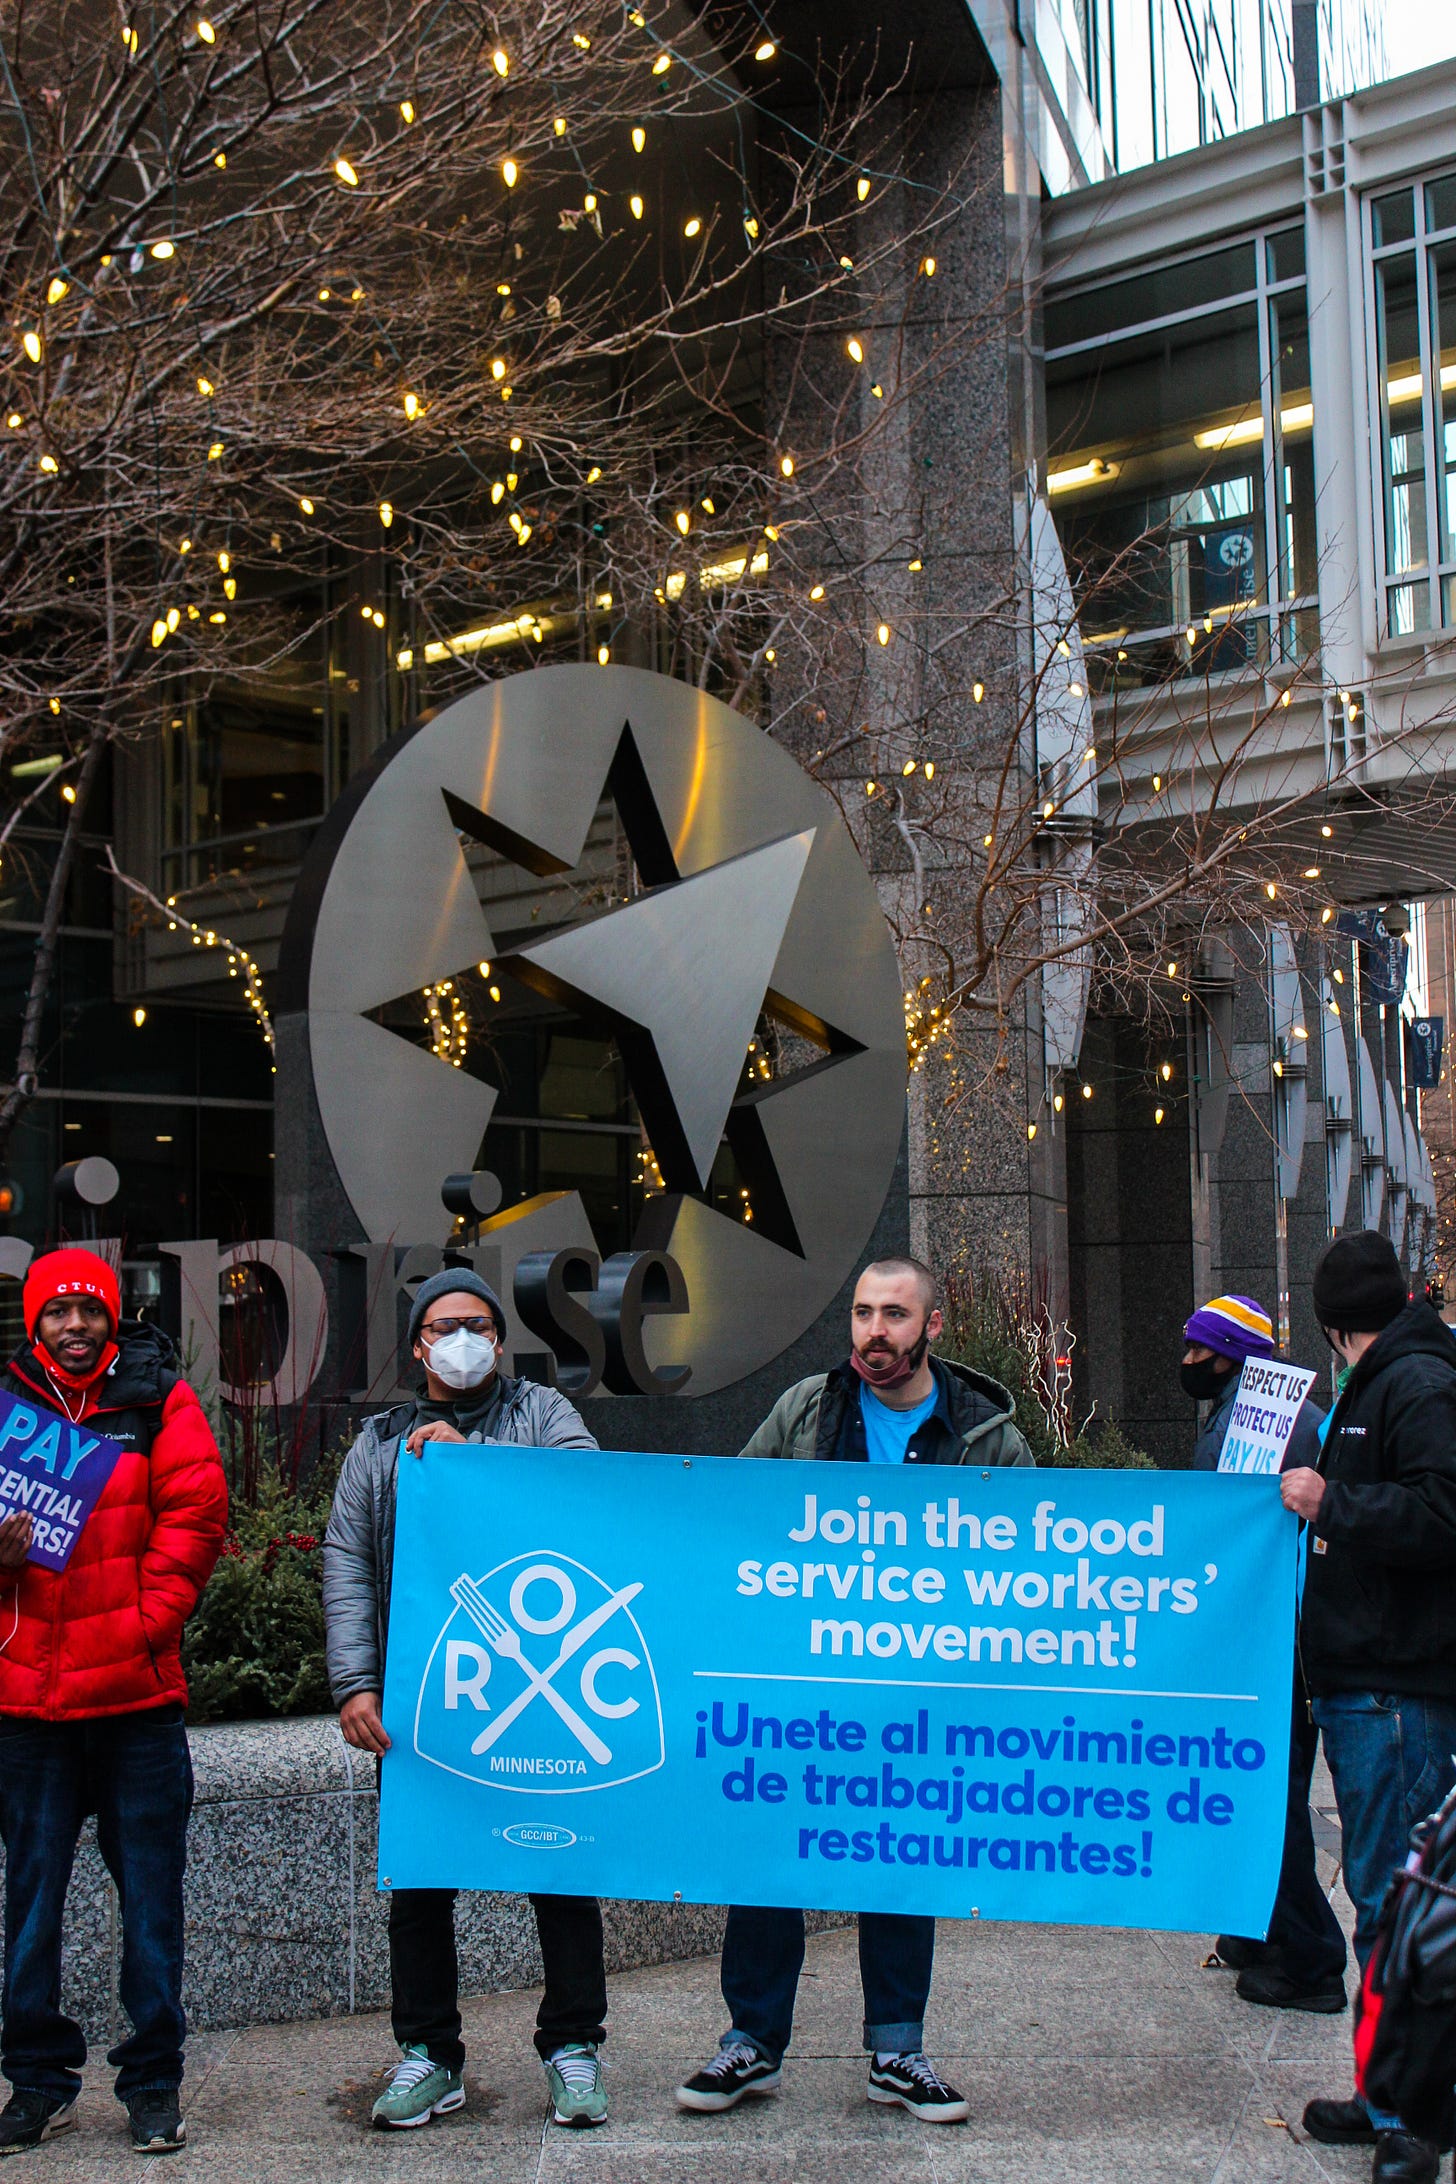 A few crowd members hold a blue sign reading “Join the food service workers’ movement!”